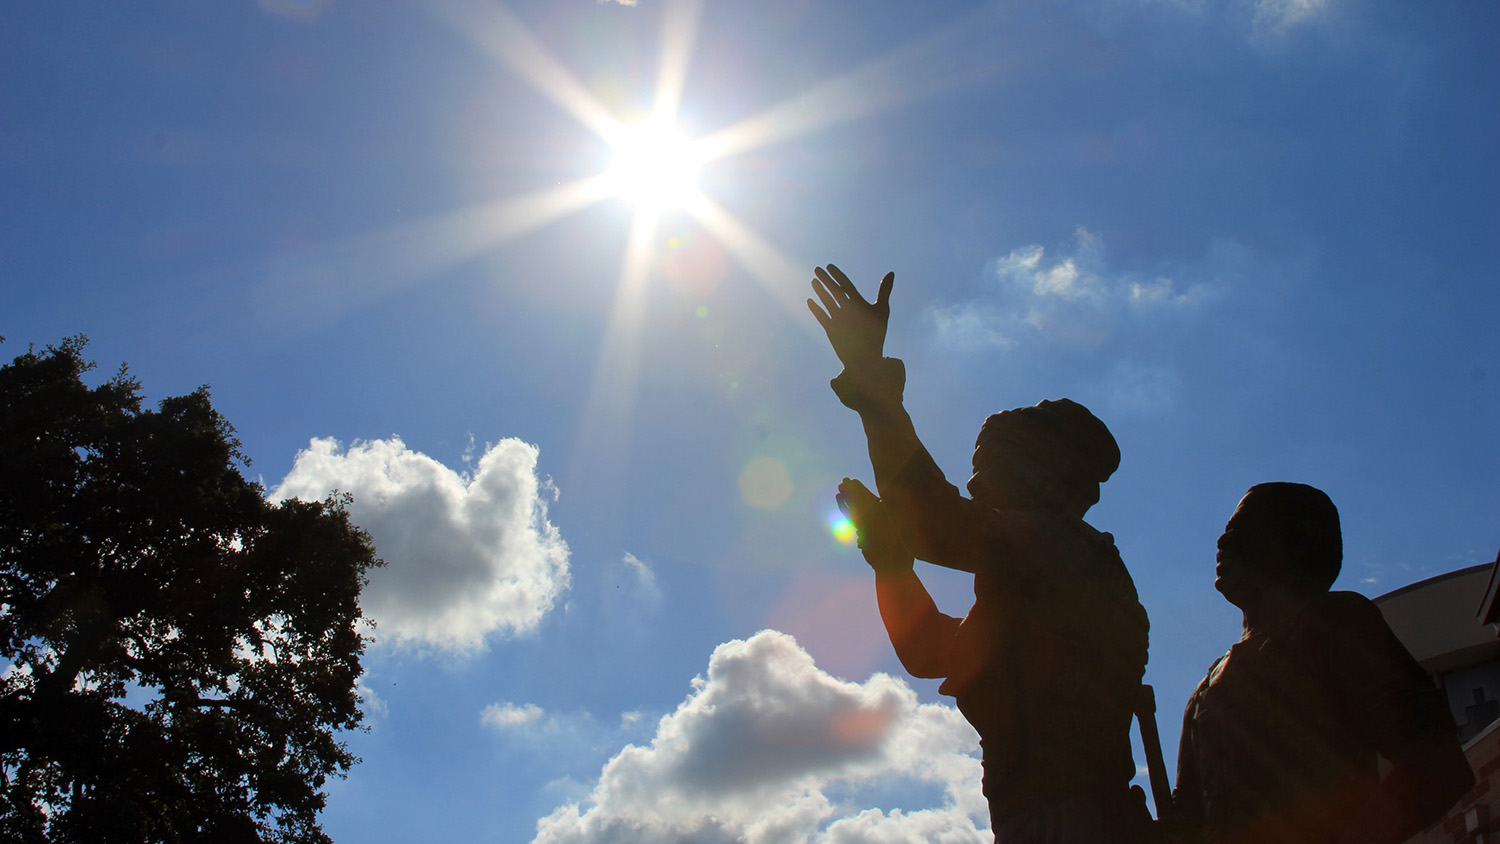 statues of a man and woman silhouetted against the sun